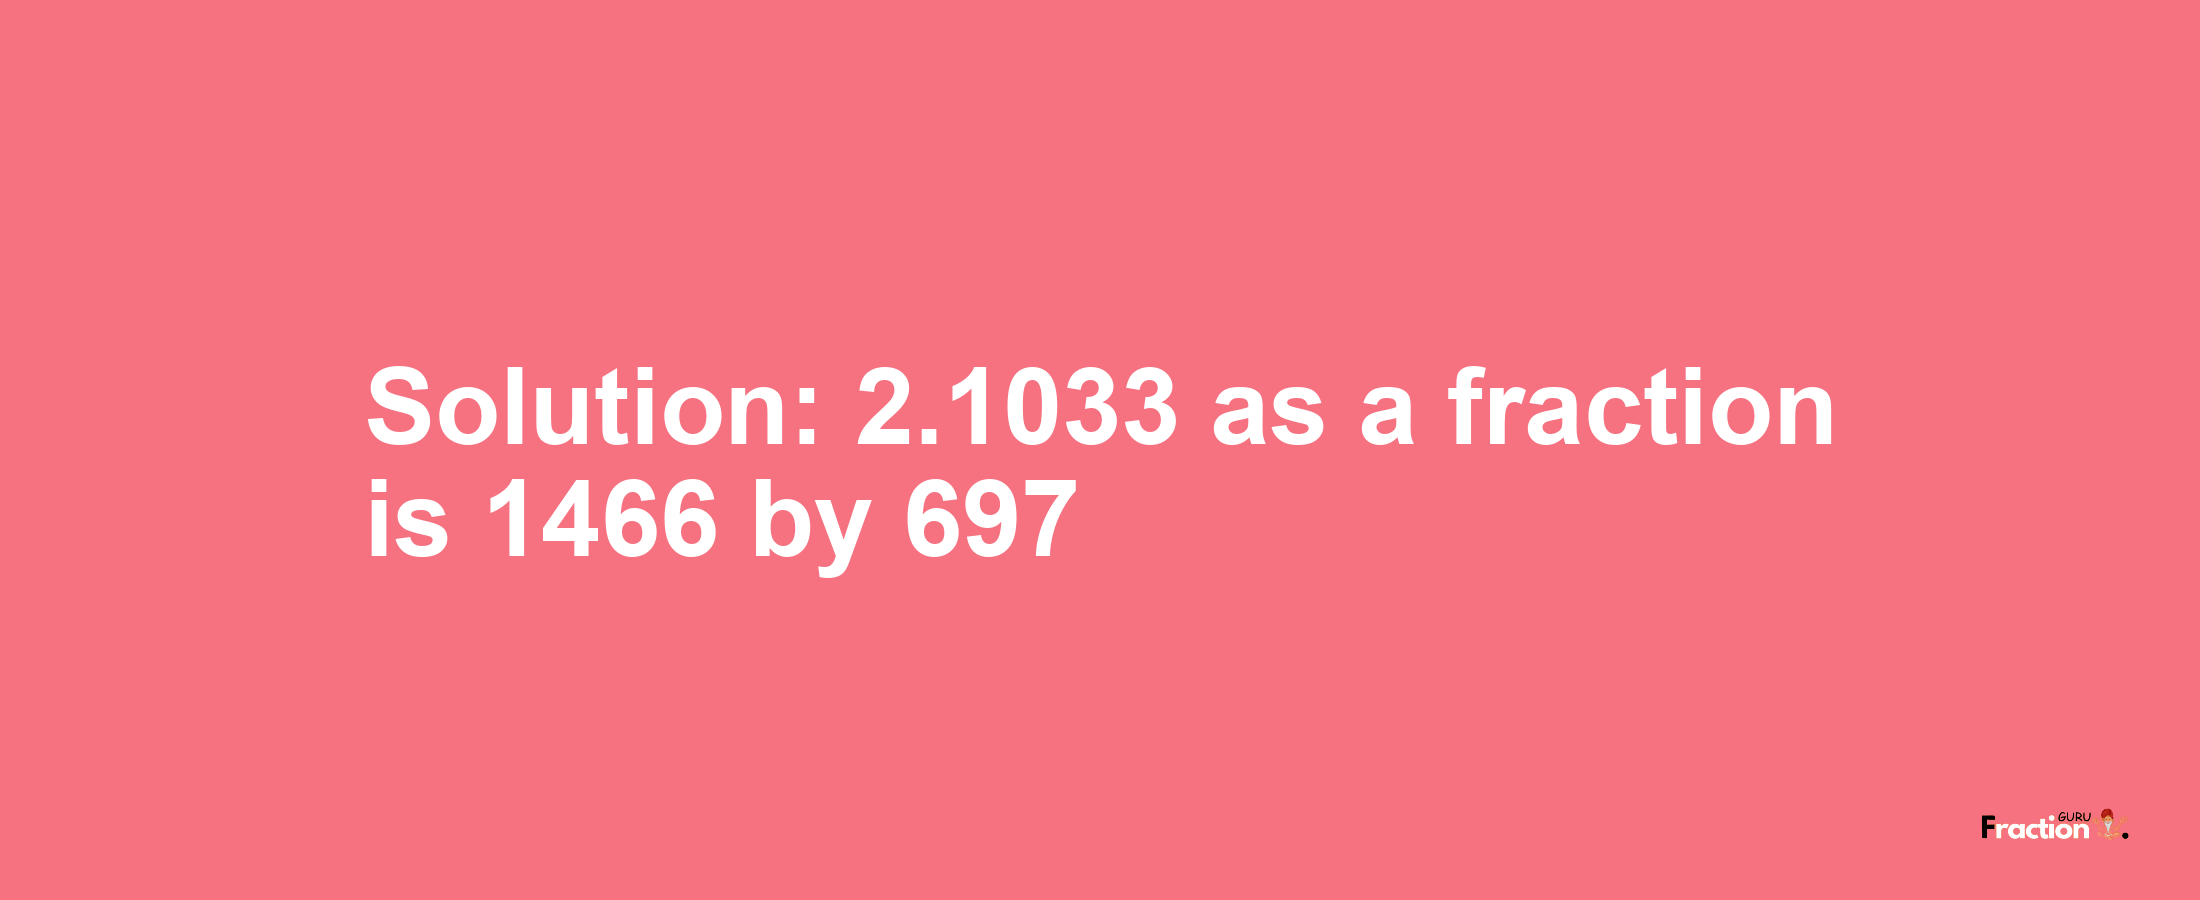 Solution:2.1033 as a fraction is 1466/697